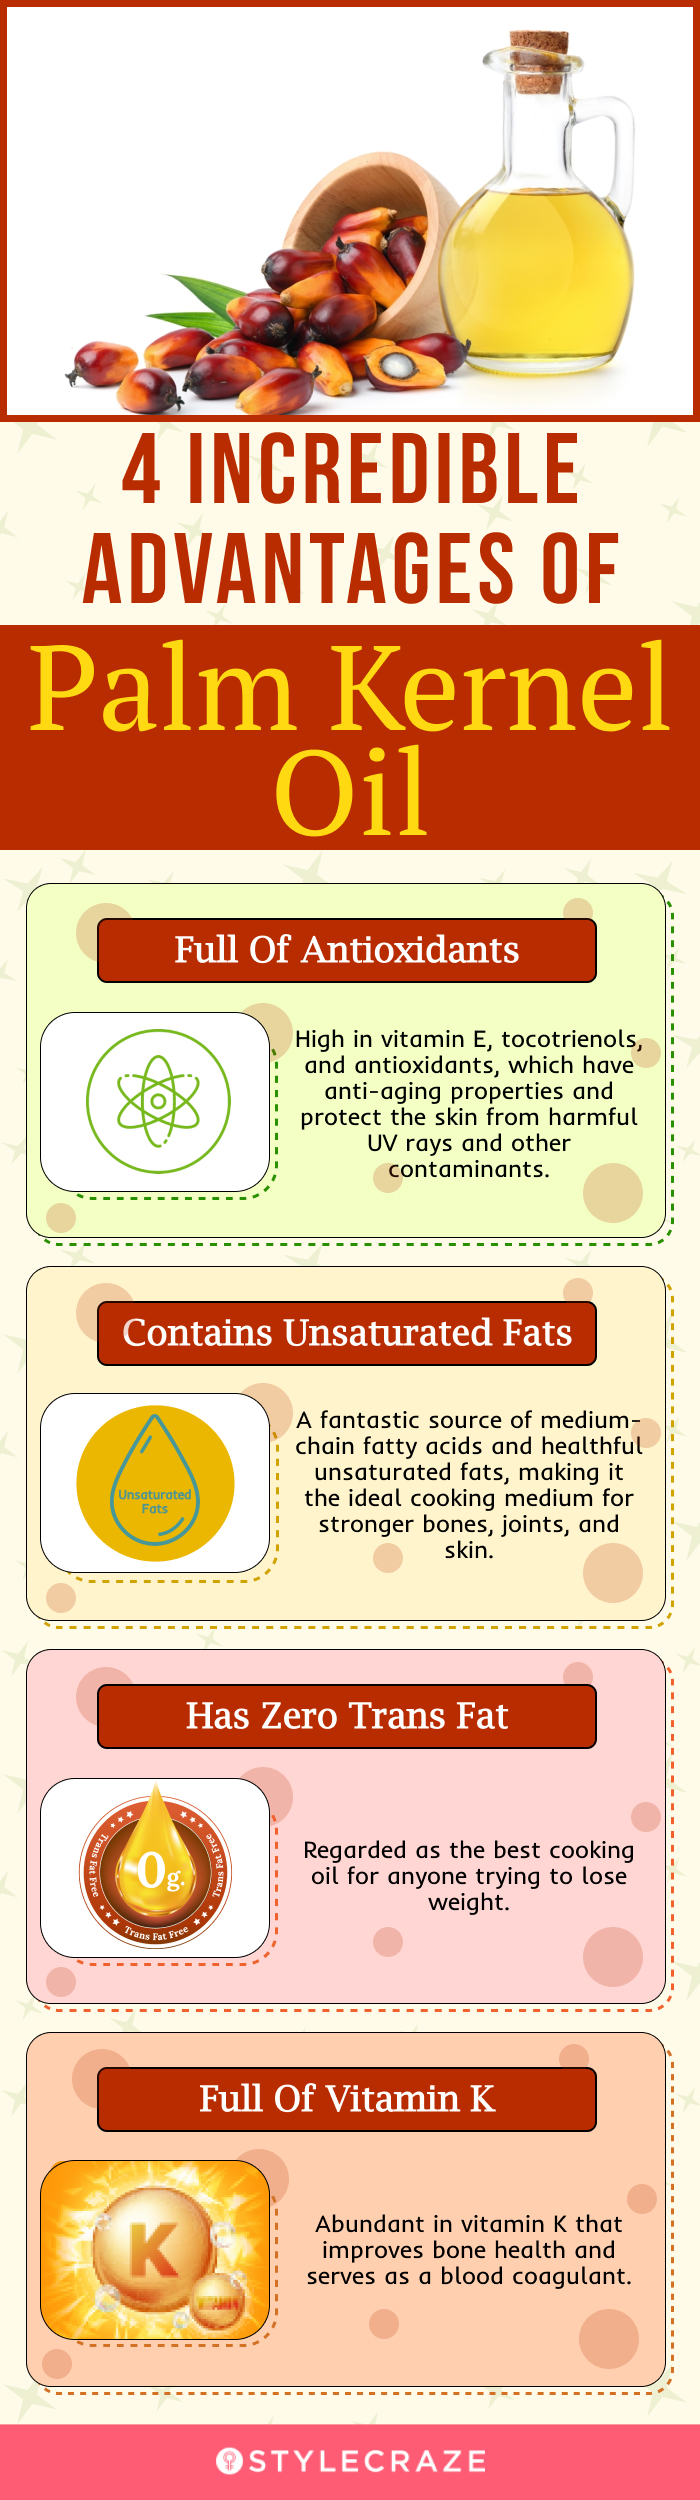 4 incredible advantages of palm kernel oil (infographic)